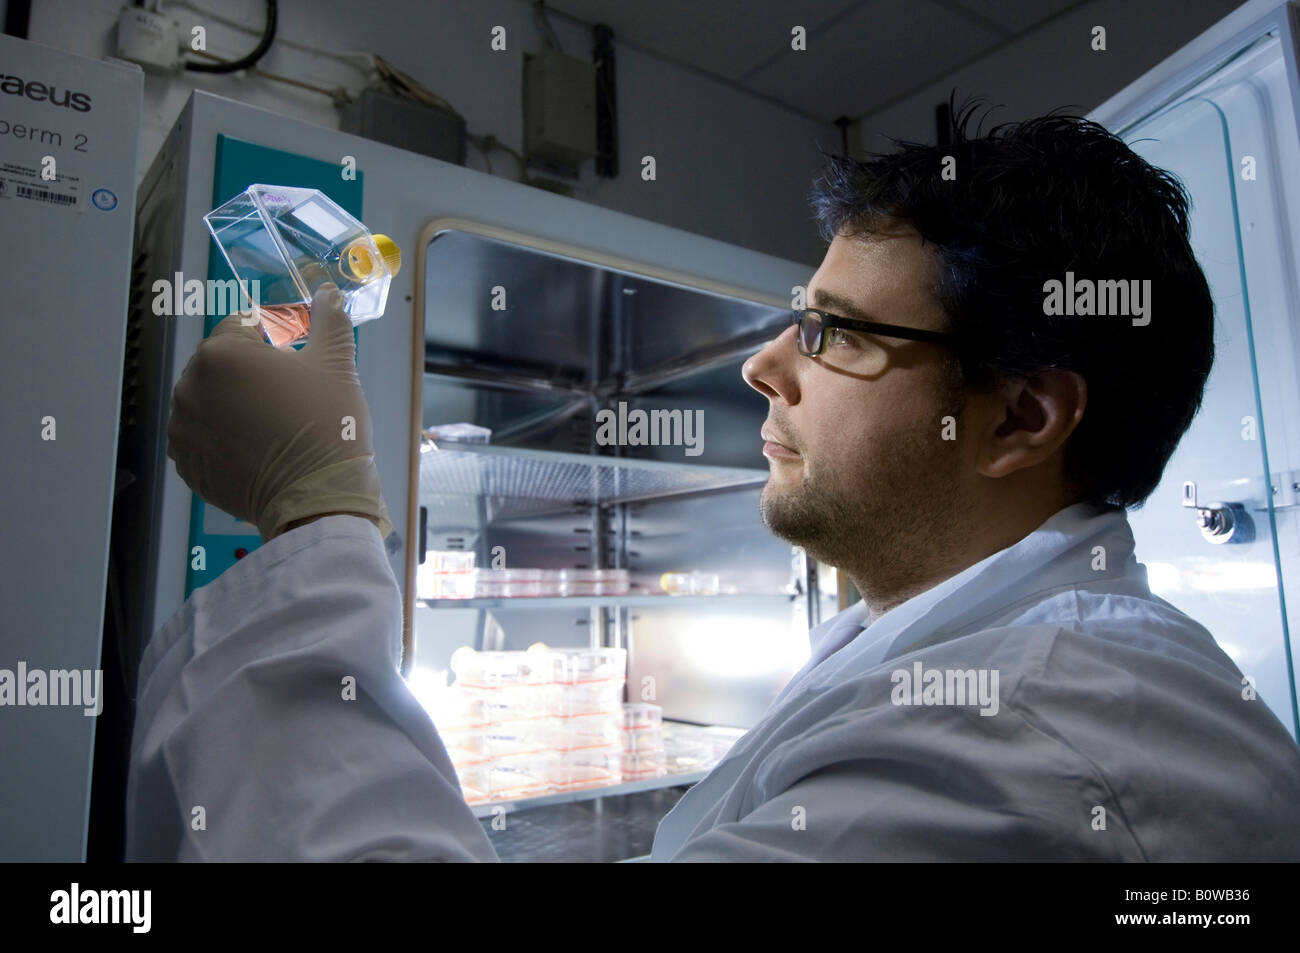 Stem cell research, Max Planck Institute for Molecular Genetics, laboratory technician at incubator with cells, Berlin, Germany Stock Photo